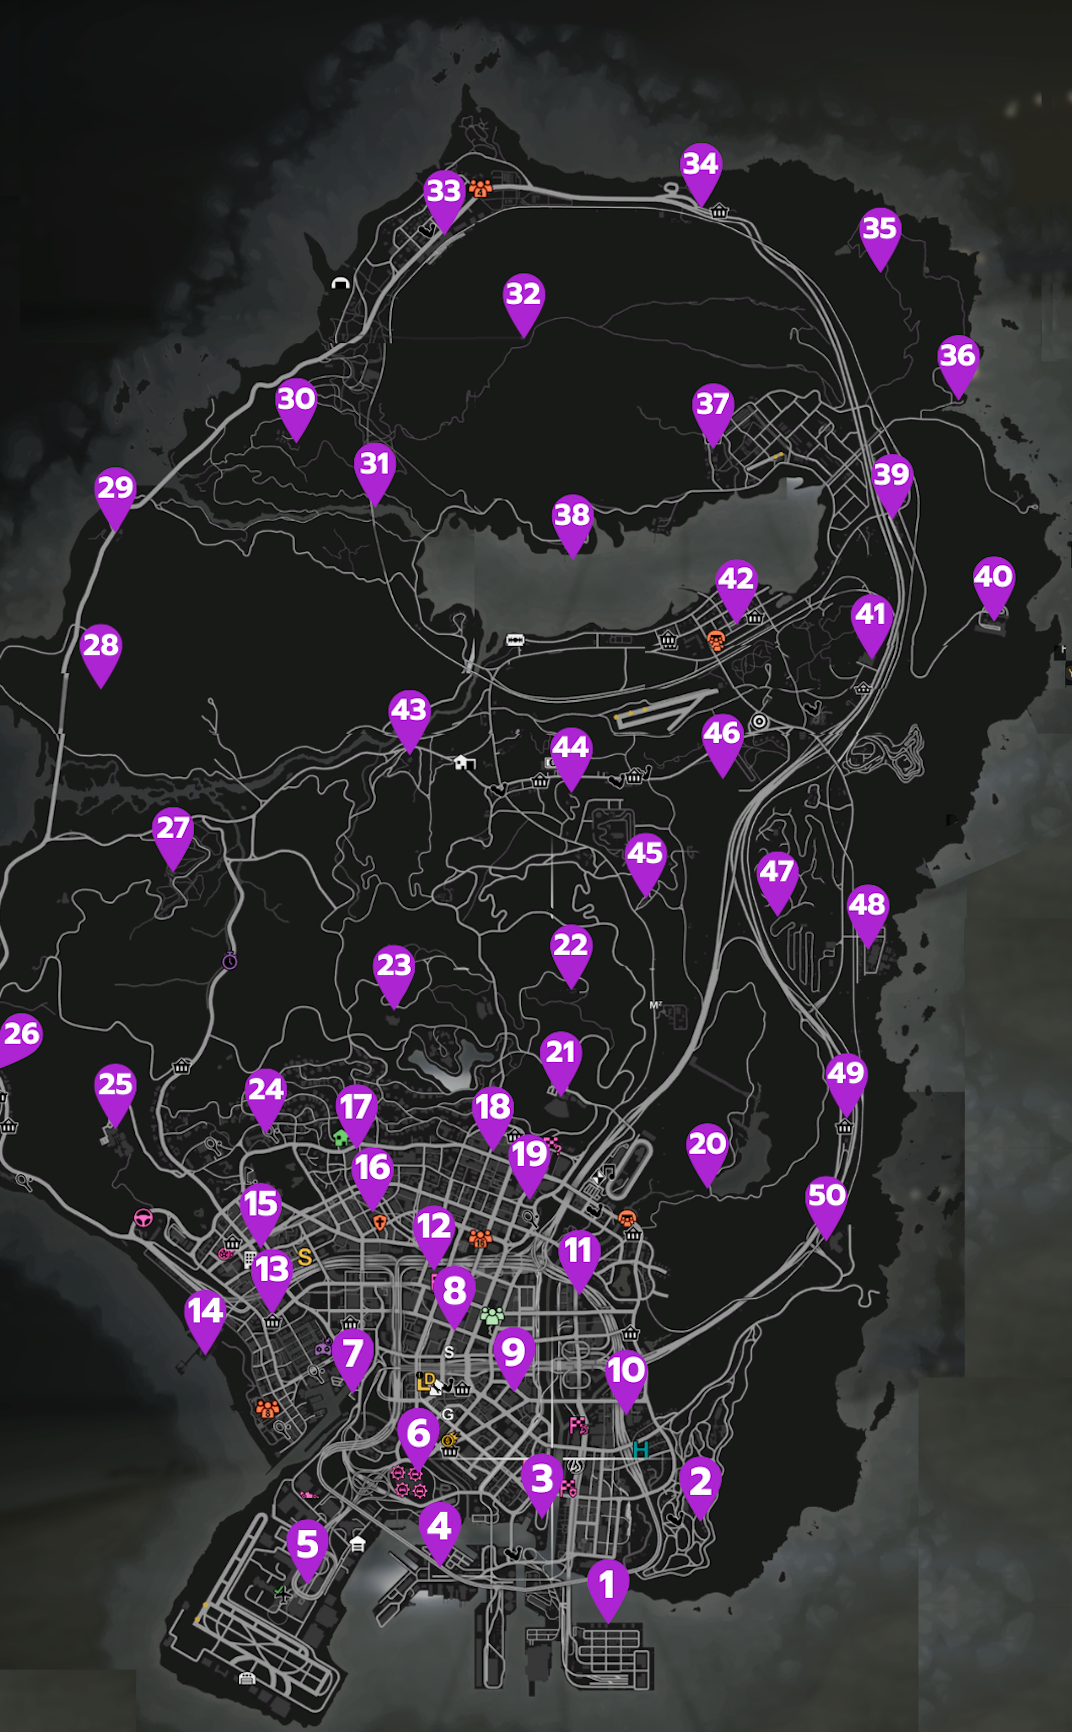 How to Find All 50 Signal Jammer Collectibles in GTA V Online, Part 2 -  RedDead.gg